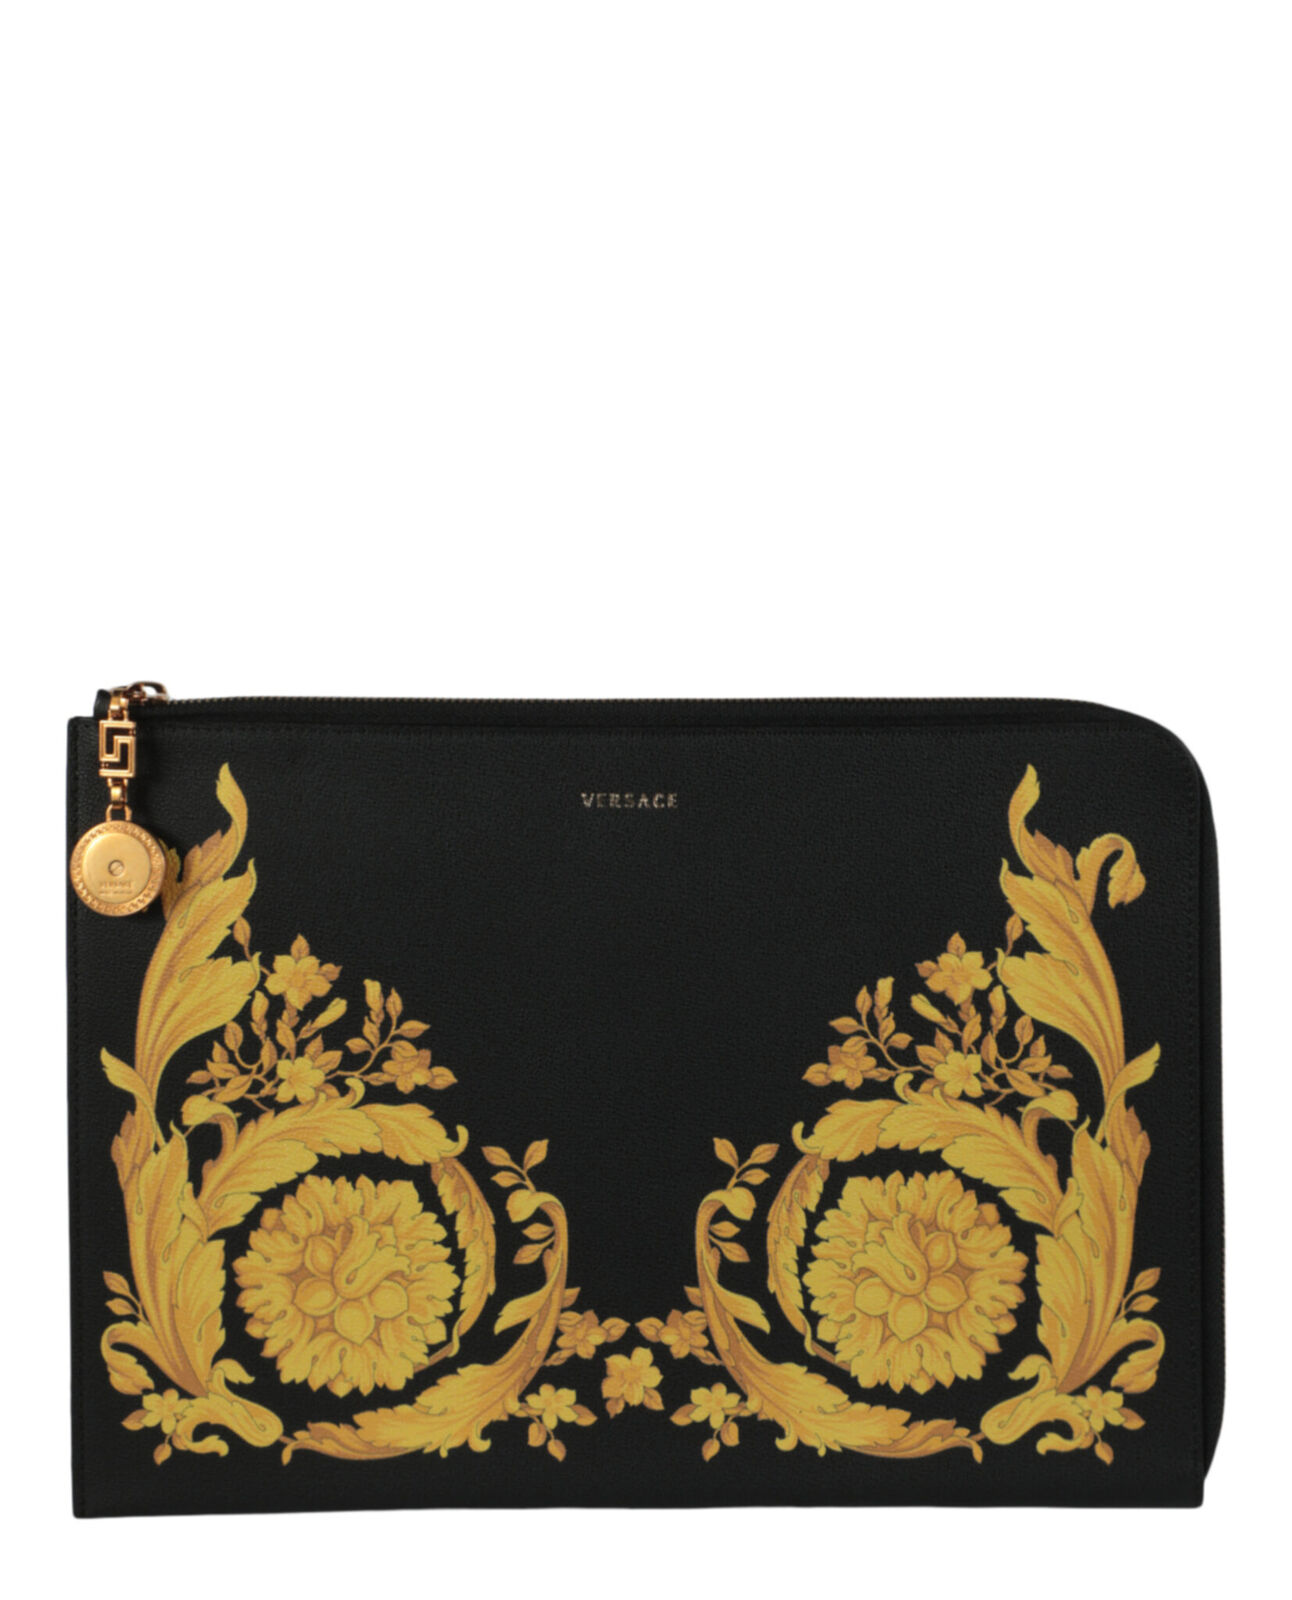 Versace Womens Barocco Printed Pouch